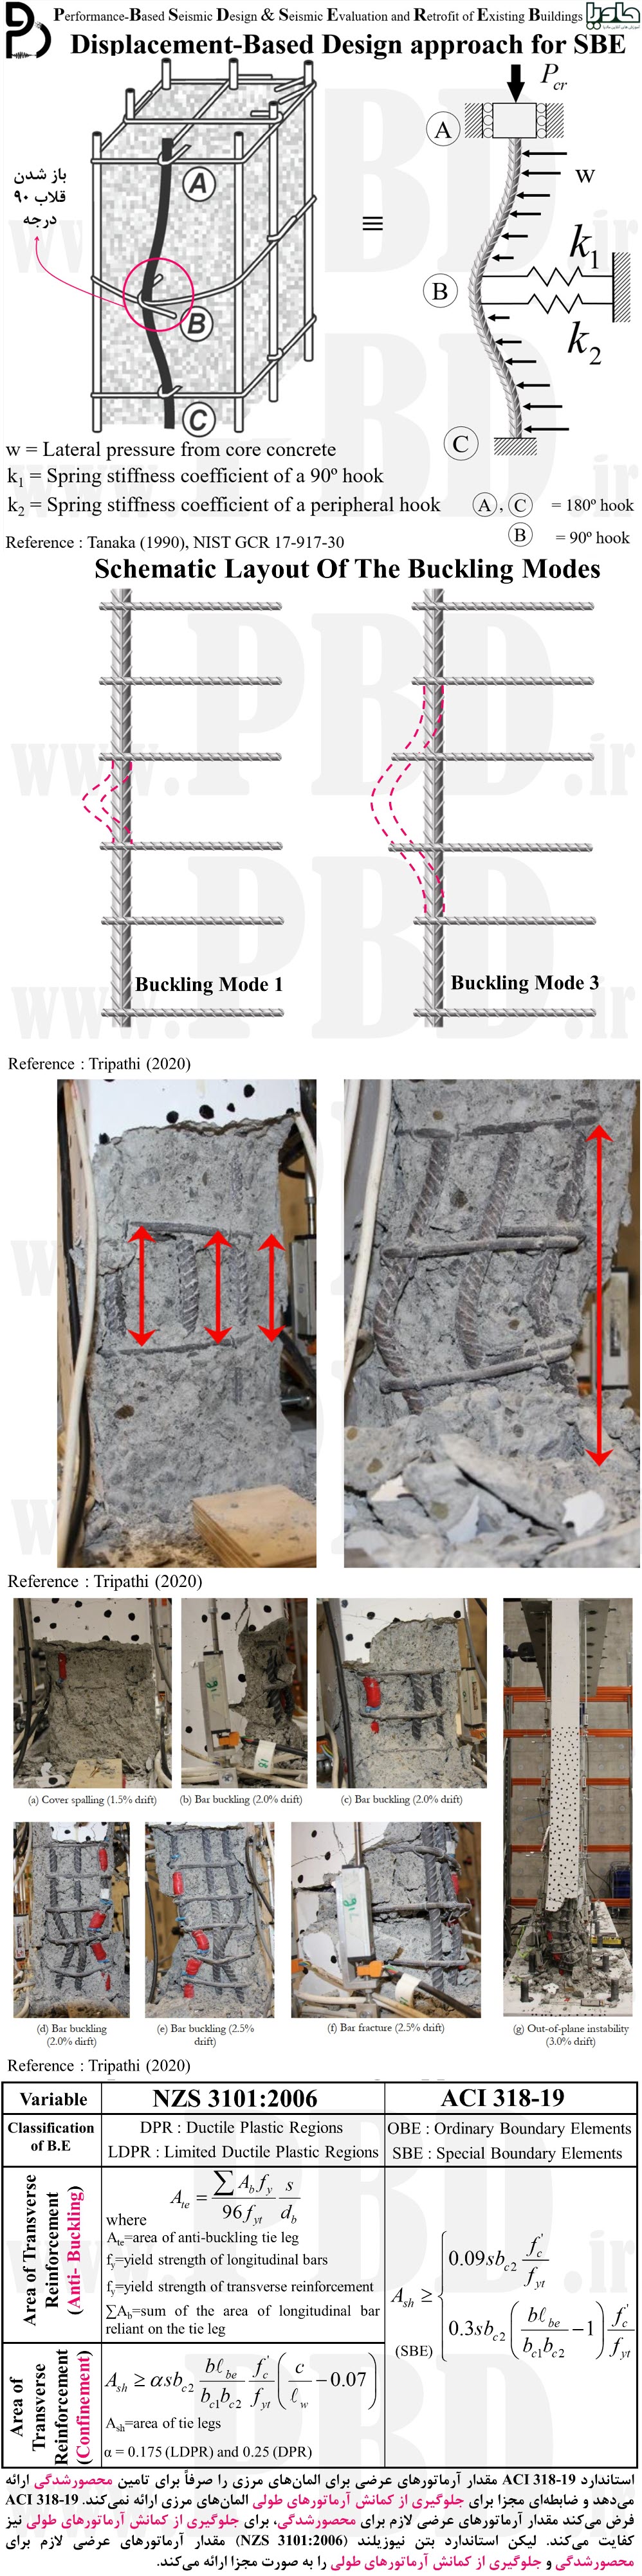  Transverse Reinforcement for "Anti-Buckling" and "Confinement" for RC Shear Wall